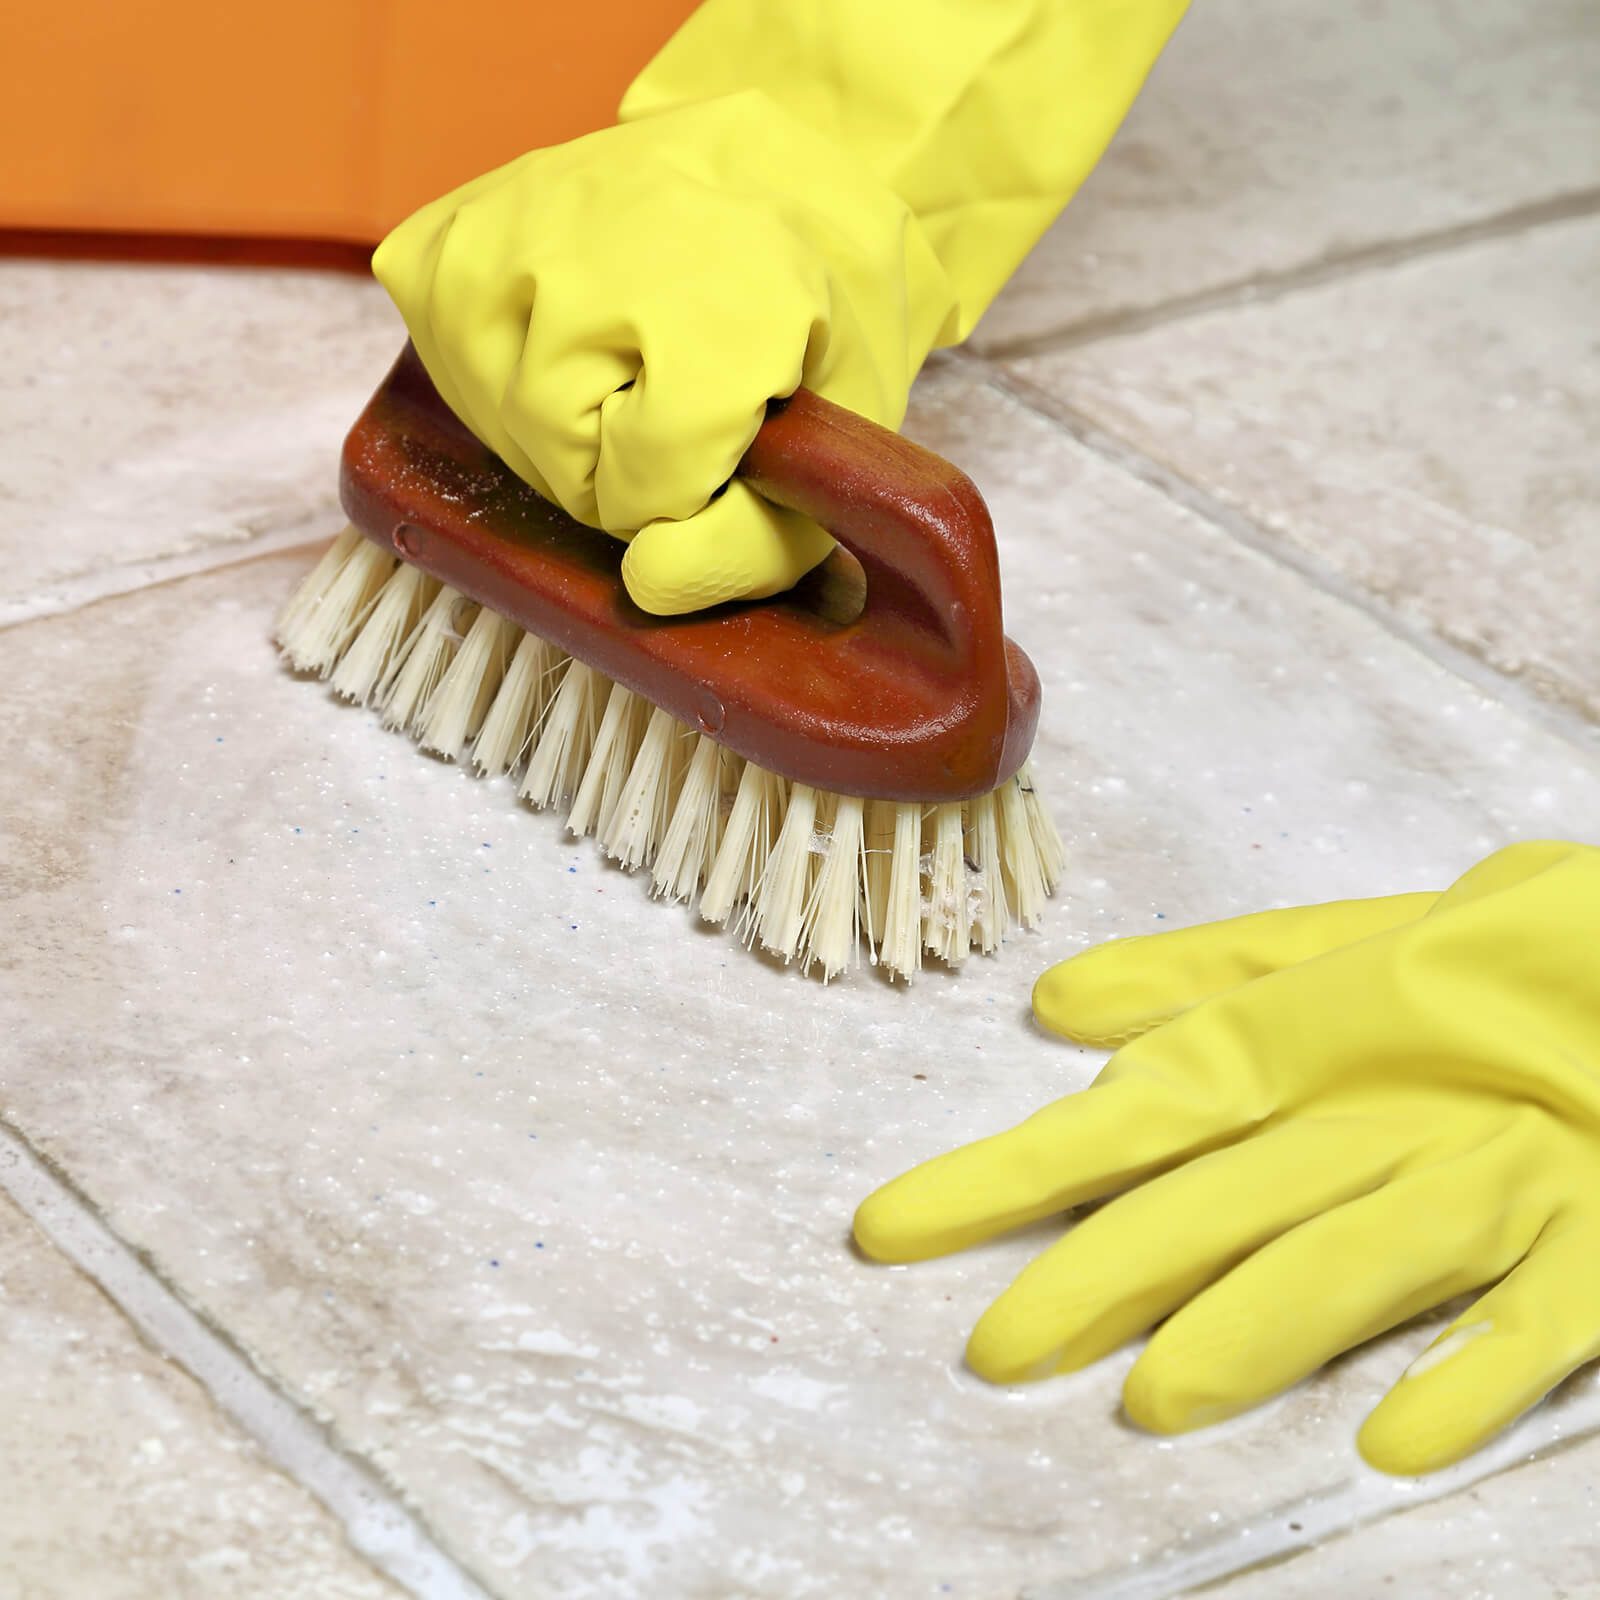 Tile cleaning | All Floors & More